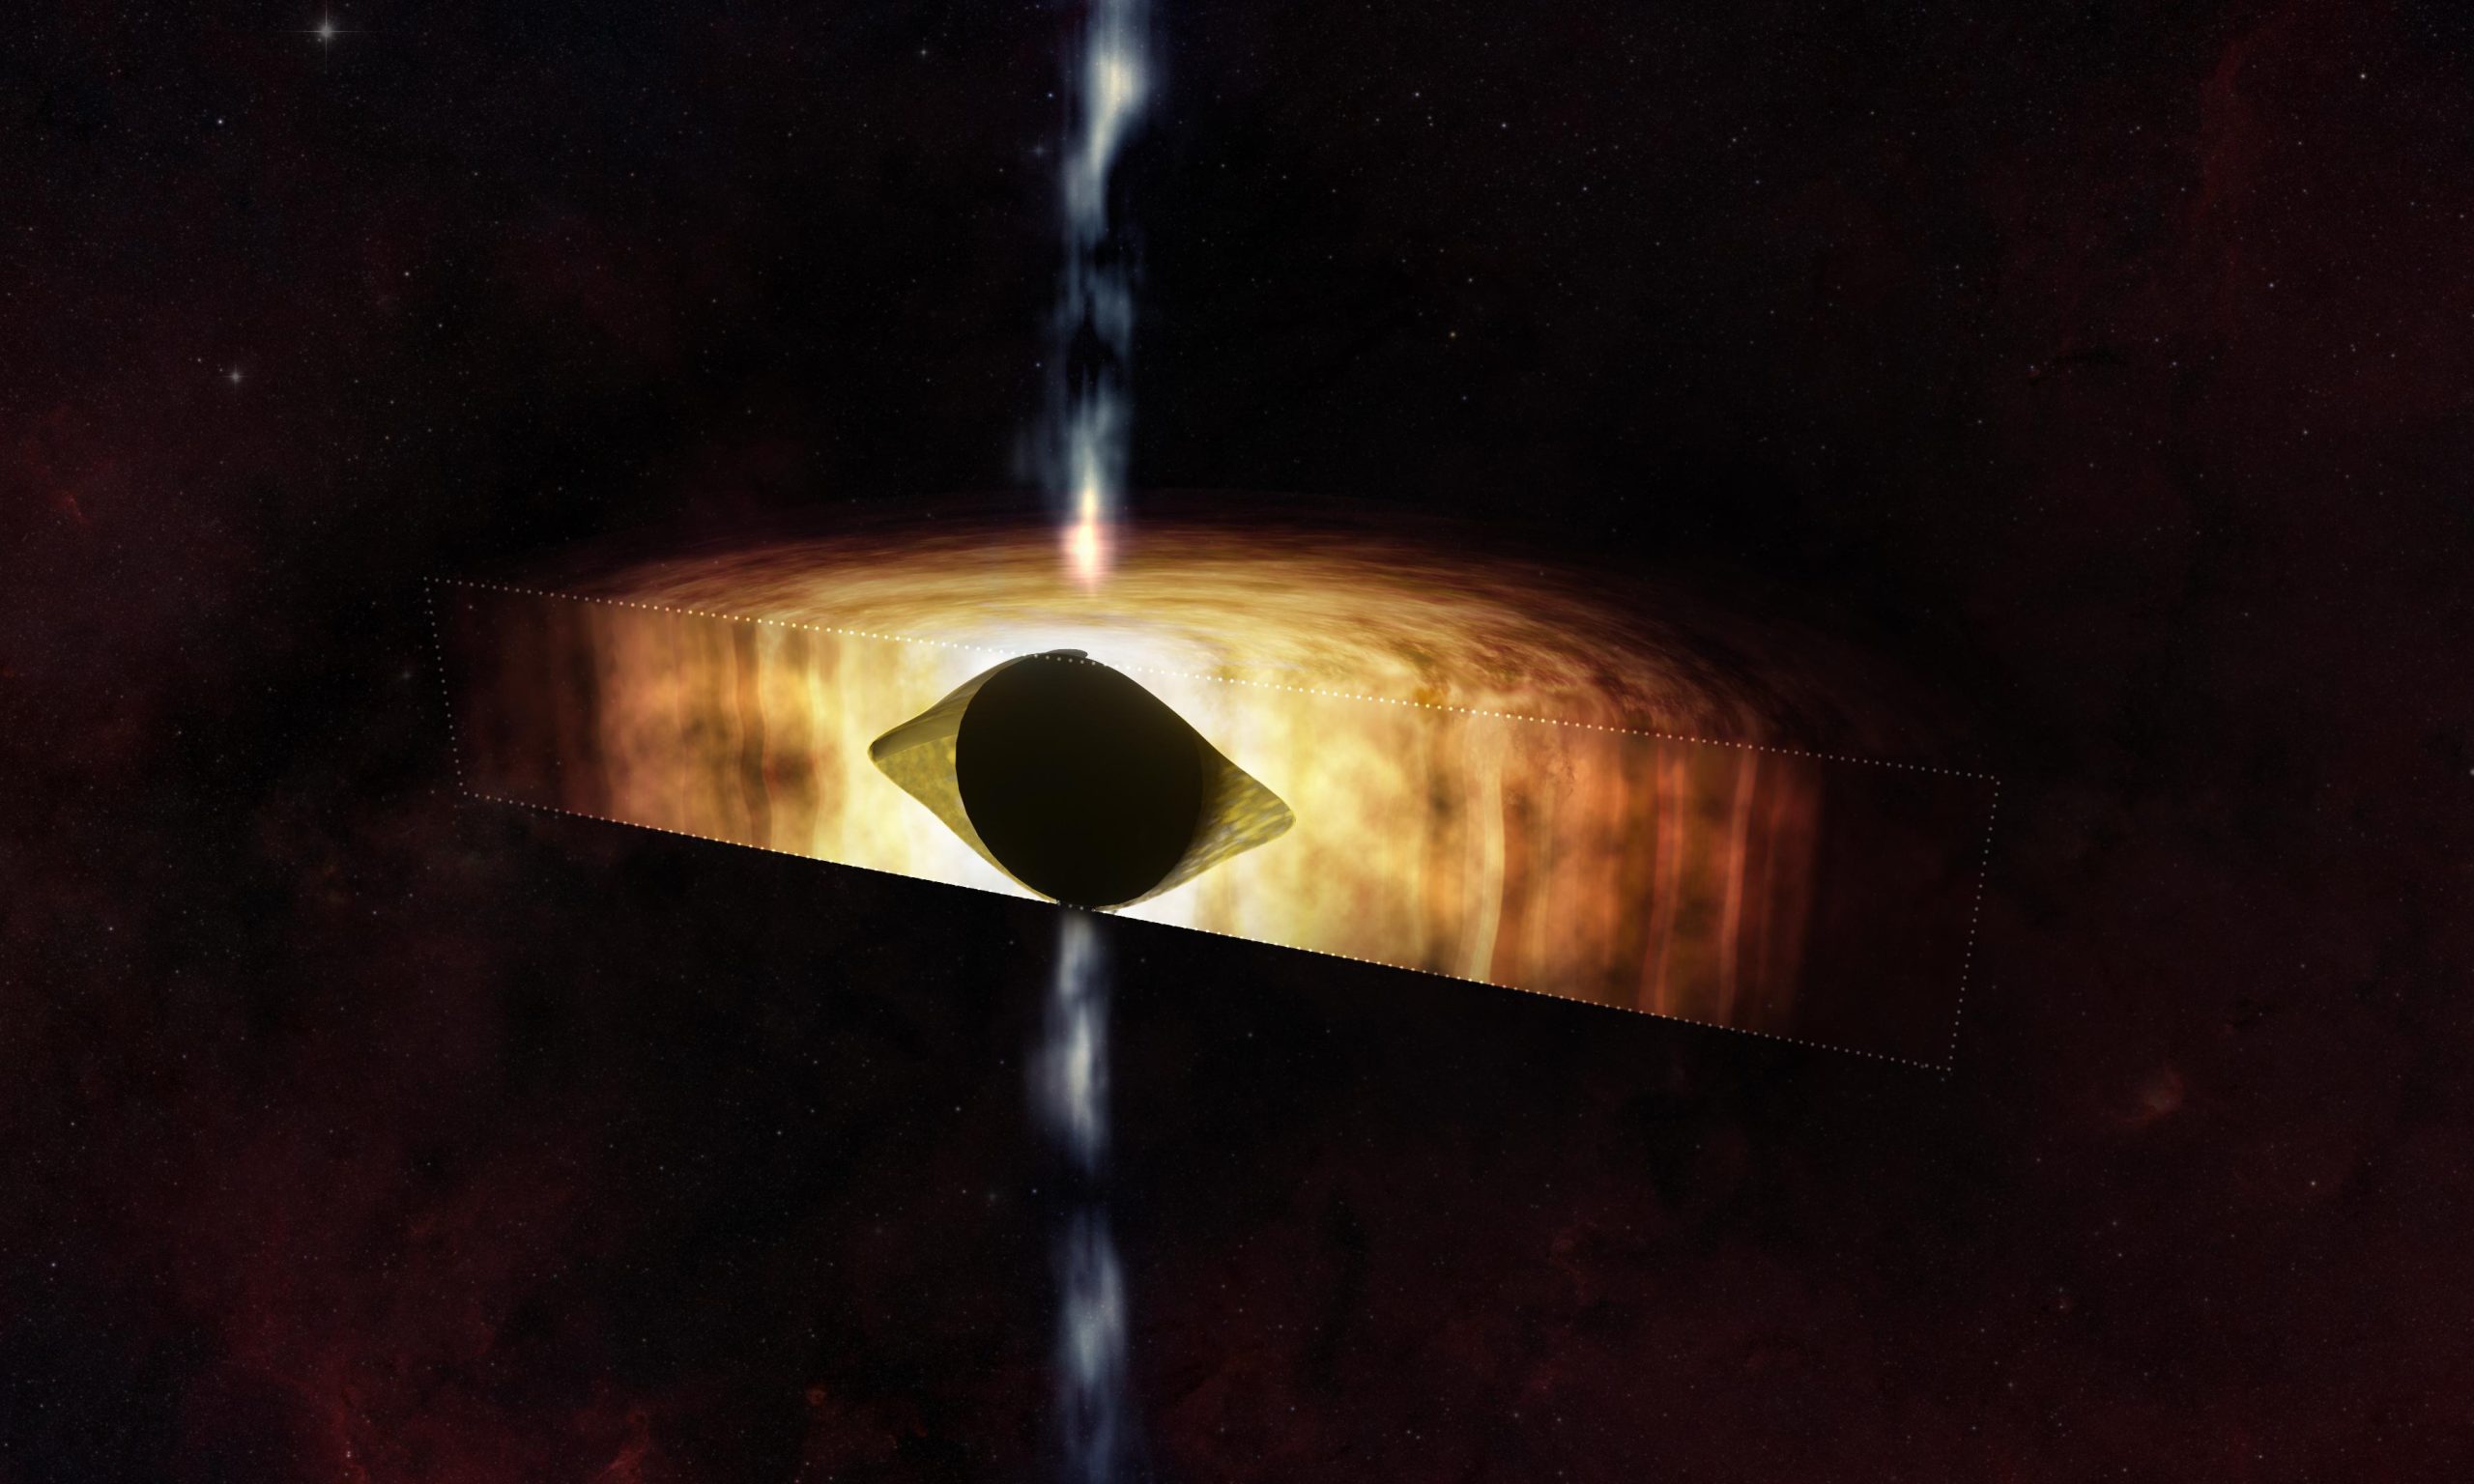 Supermassive-Black-Hole-and-Surrounding-Material-Cross-Section-Crop-scaled.jpg